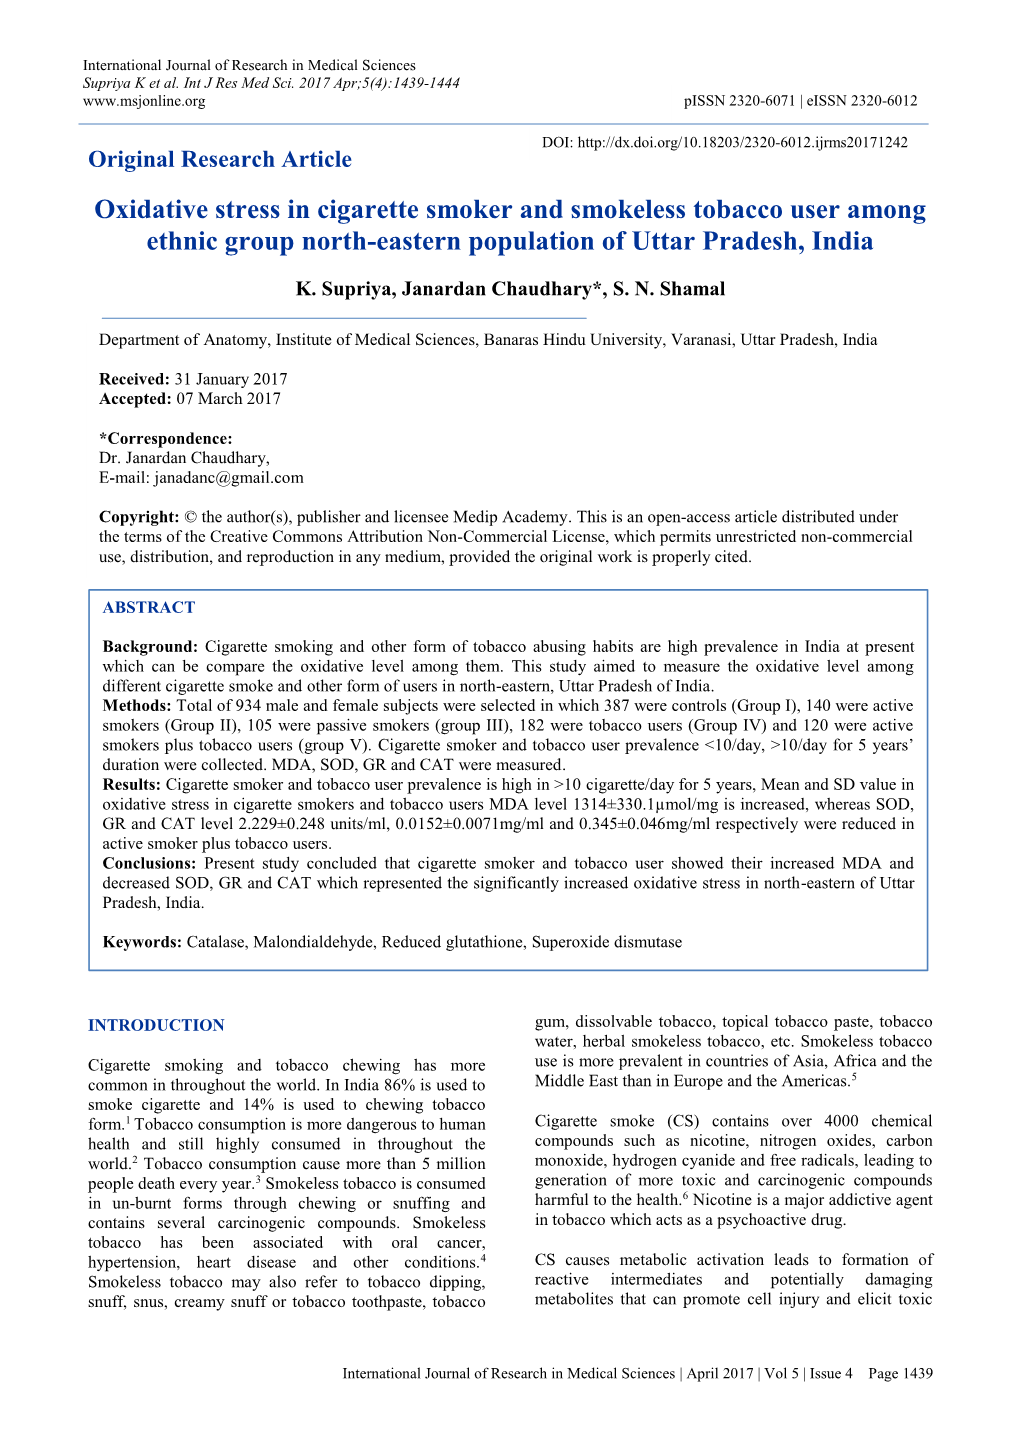 Oxidative Stress in Cigarette Smoker and Smokeless Tobacco User Among Ethnic Group North-Eastern Population of Uttar Pradesh, India